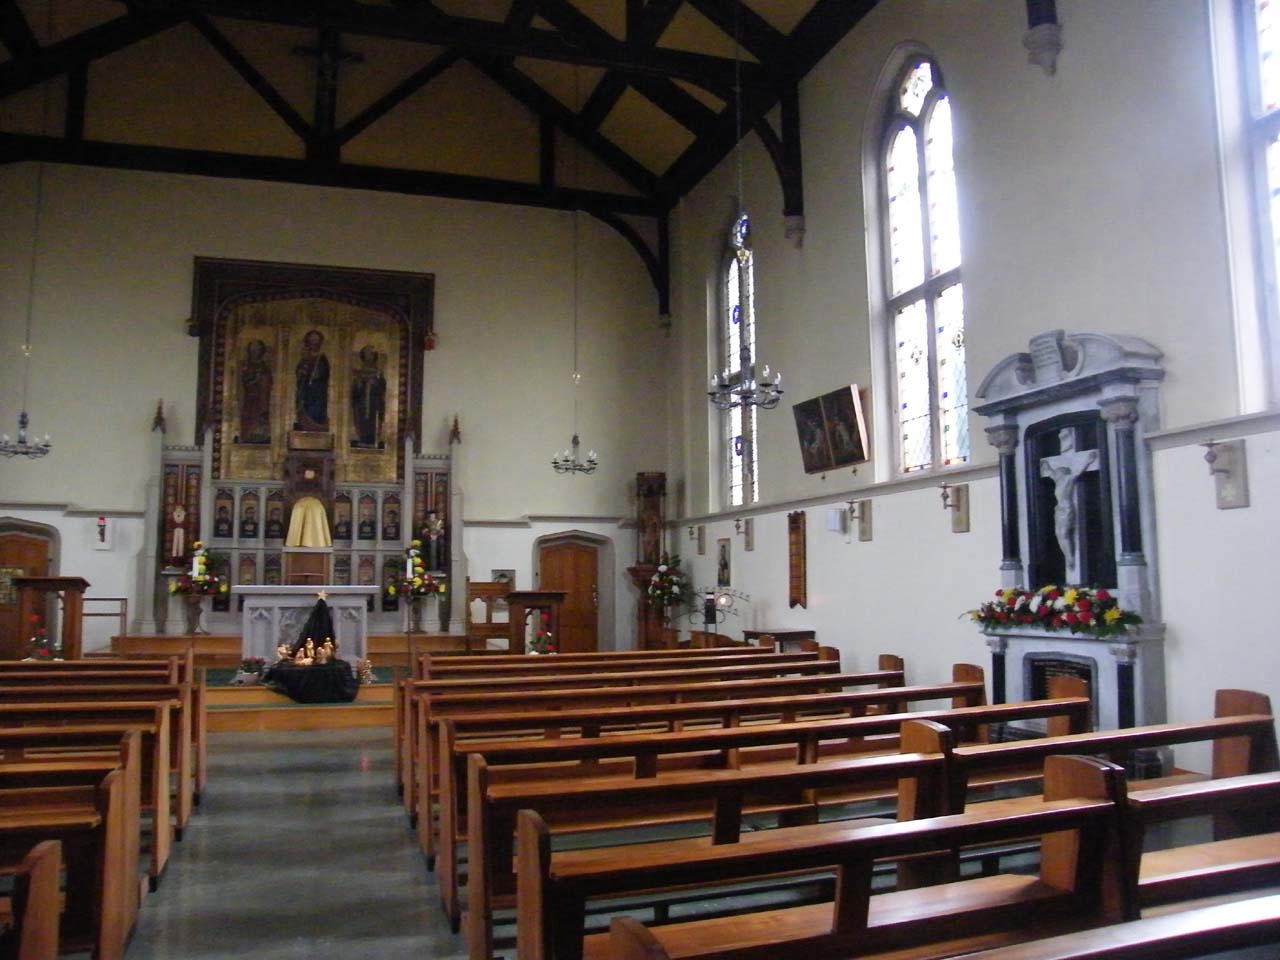 The Inside of St Mary